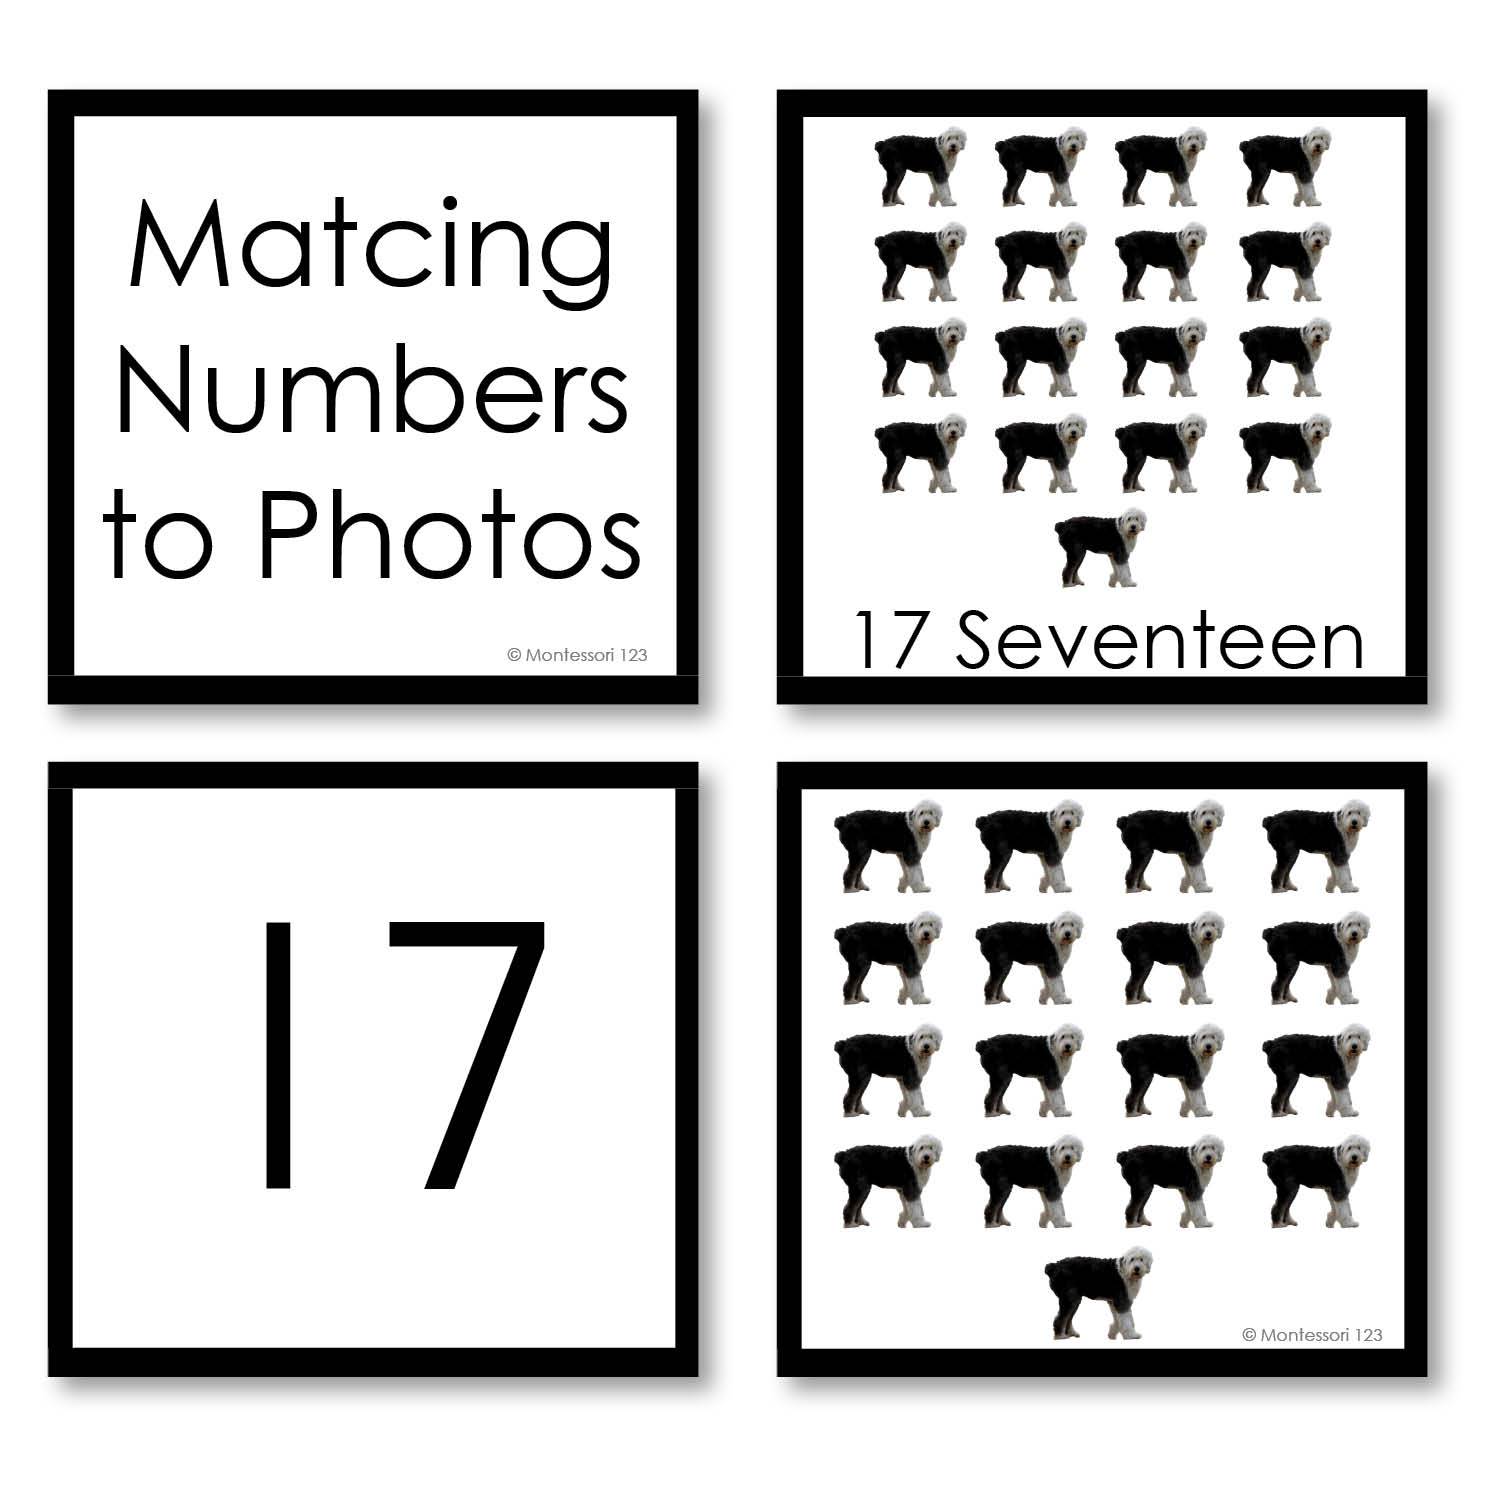 Matching Numbers to Photos (0-20)